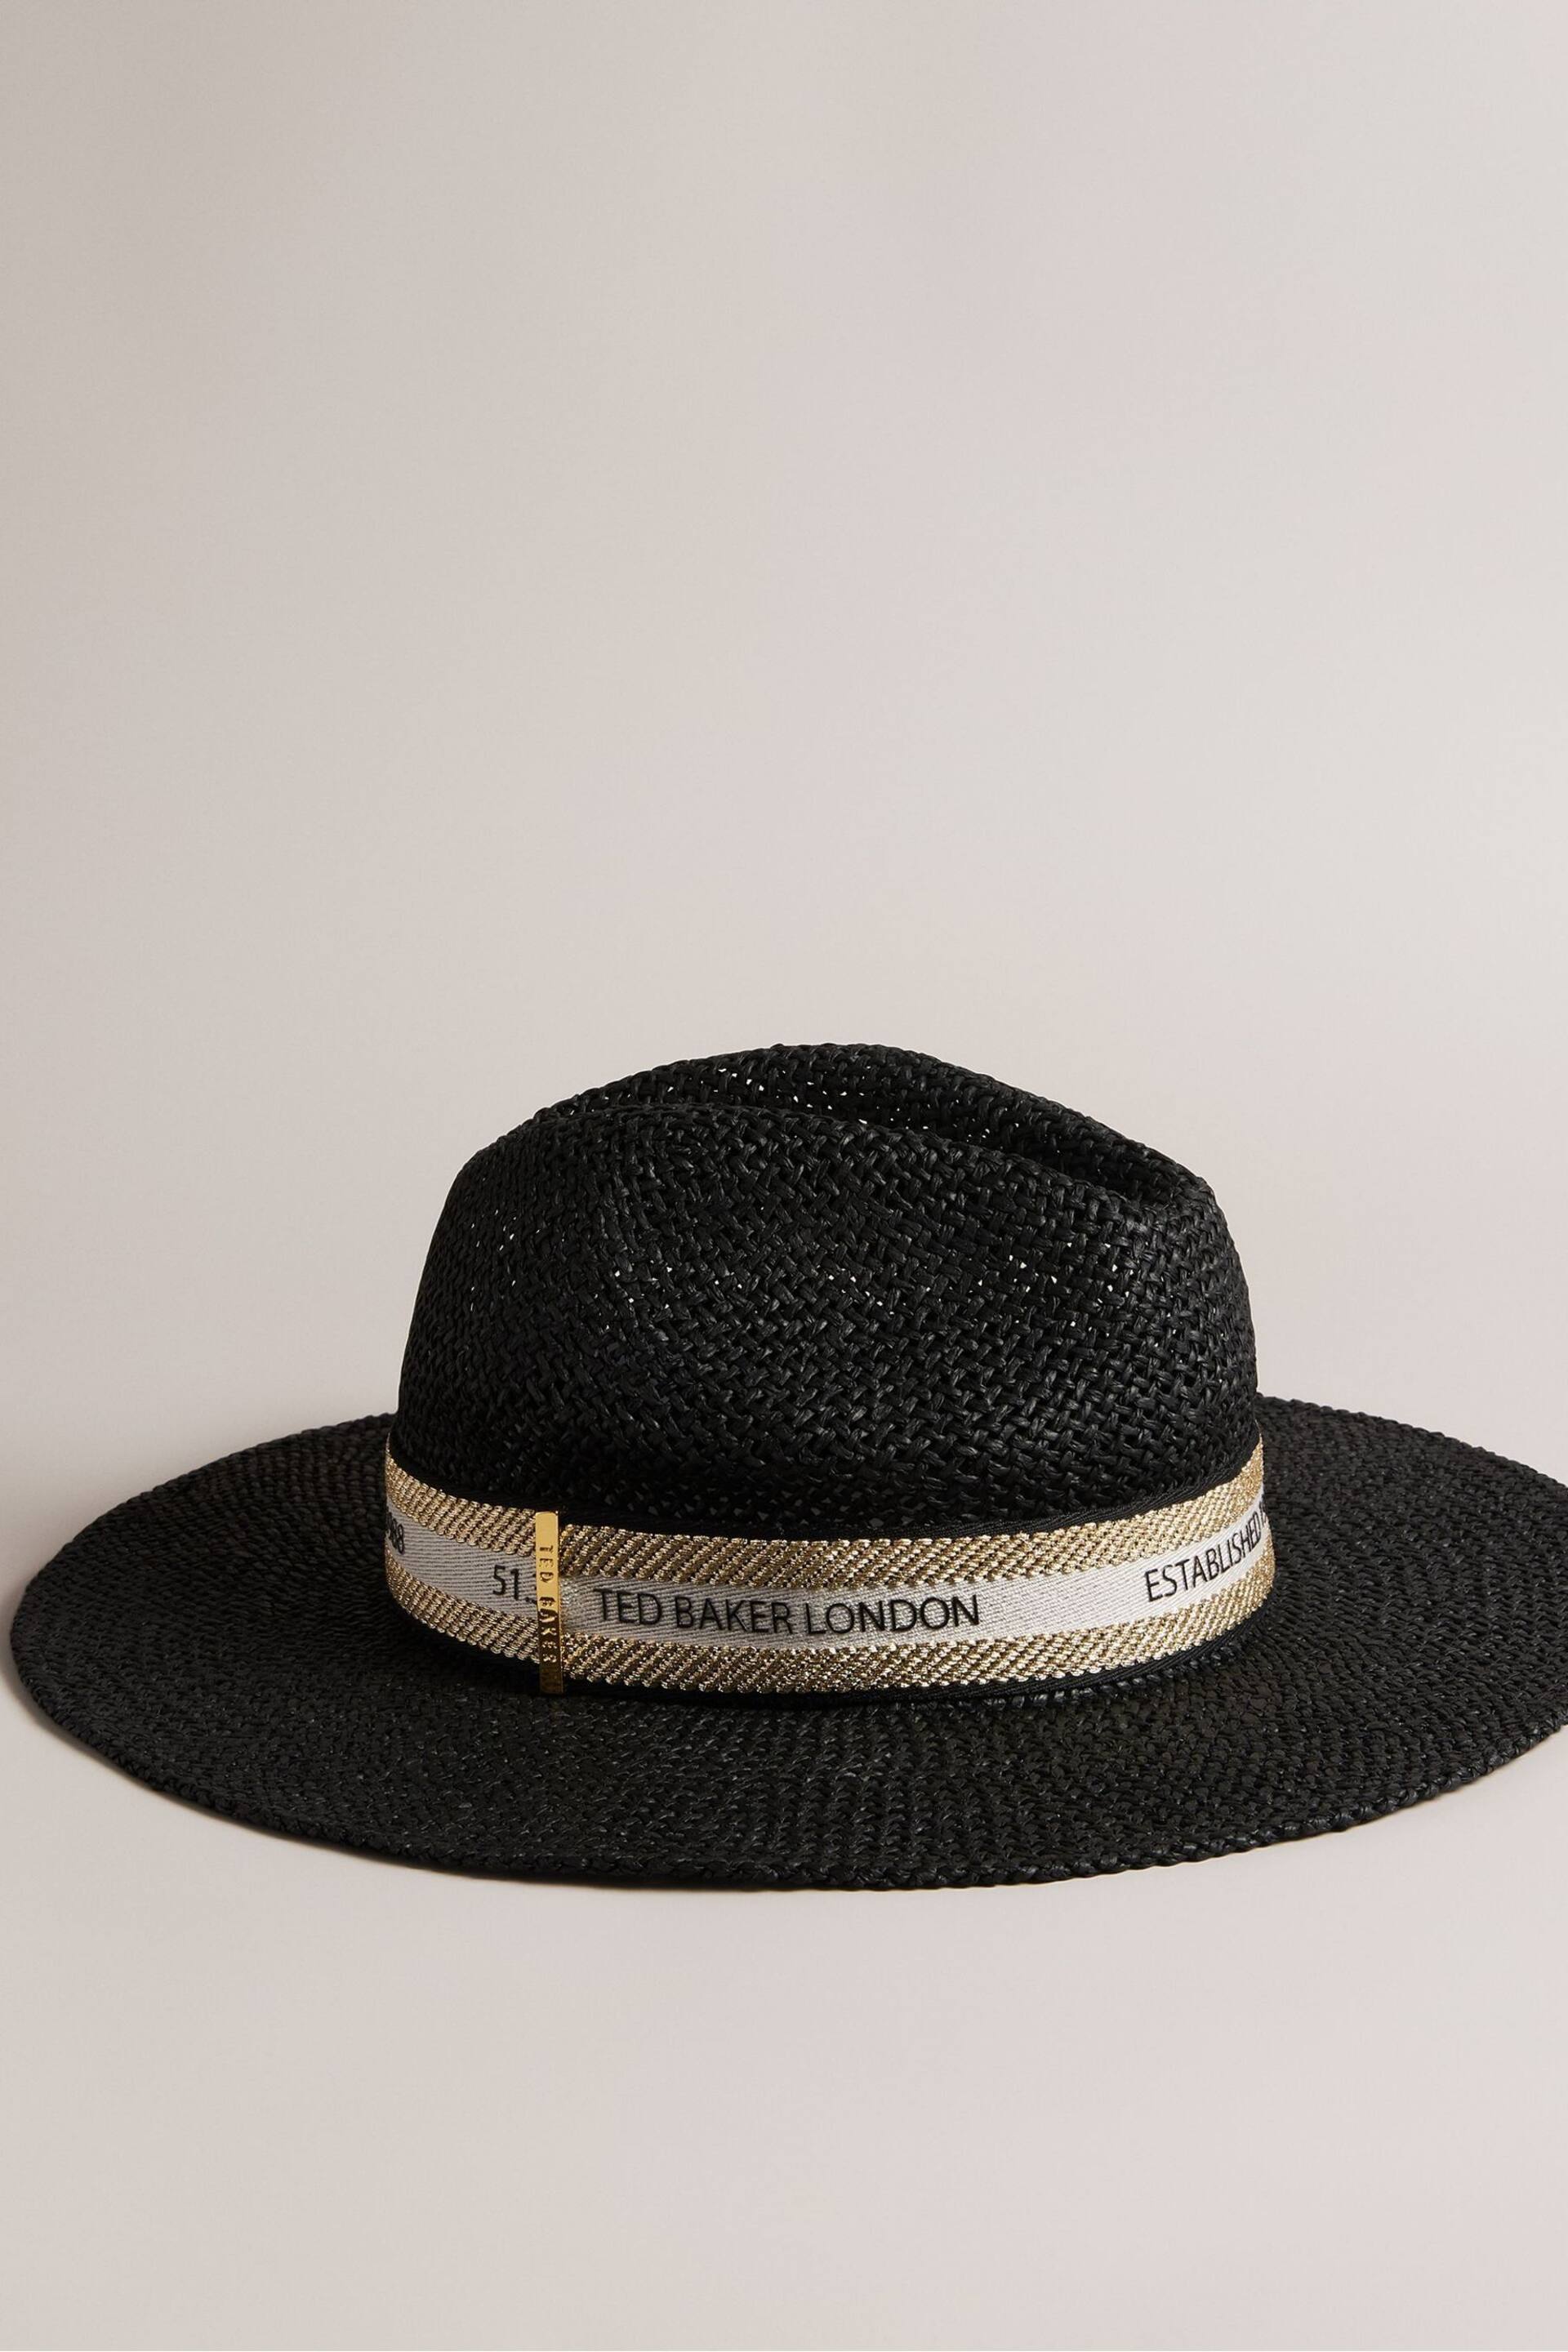 Ted Baker Black Straw Clairie Fedora Hat - Image 2 of 3